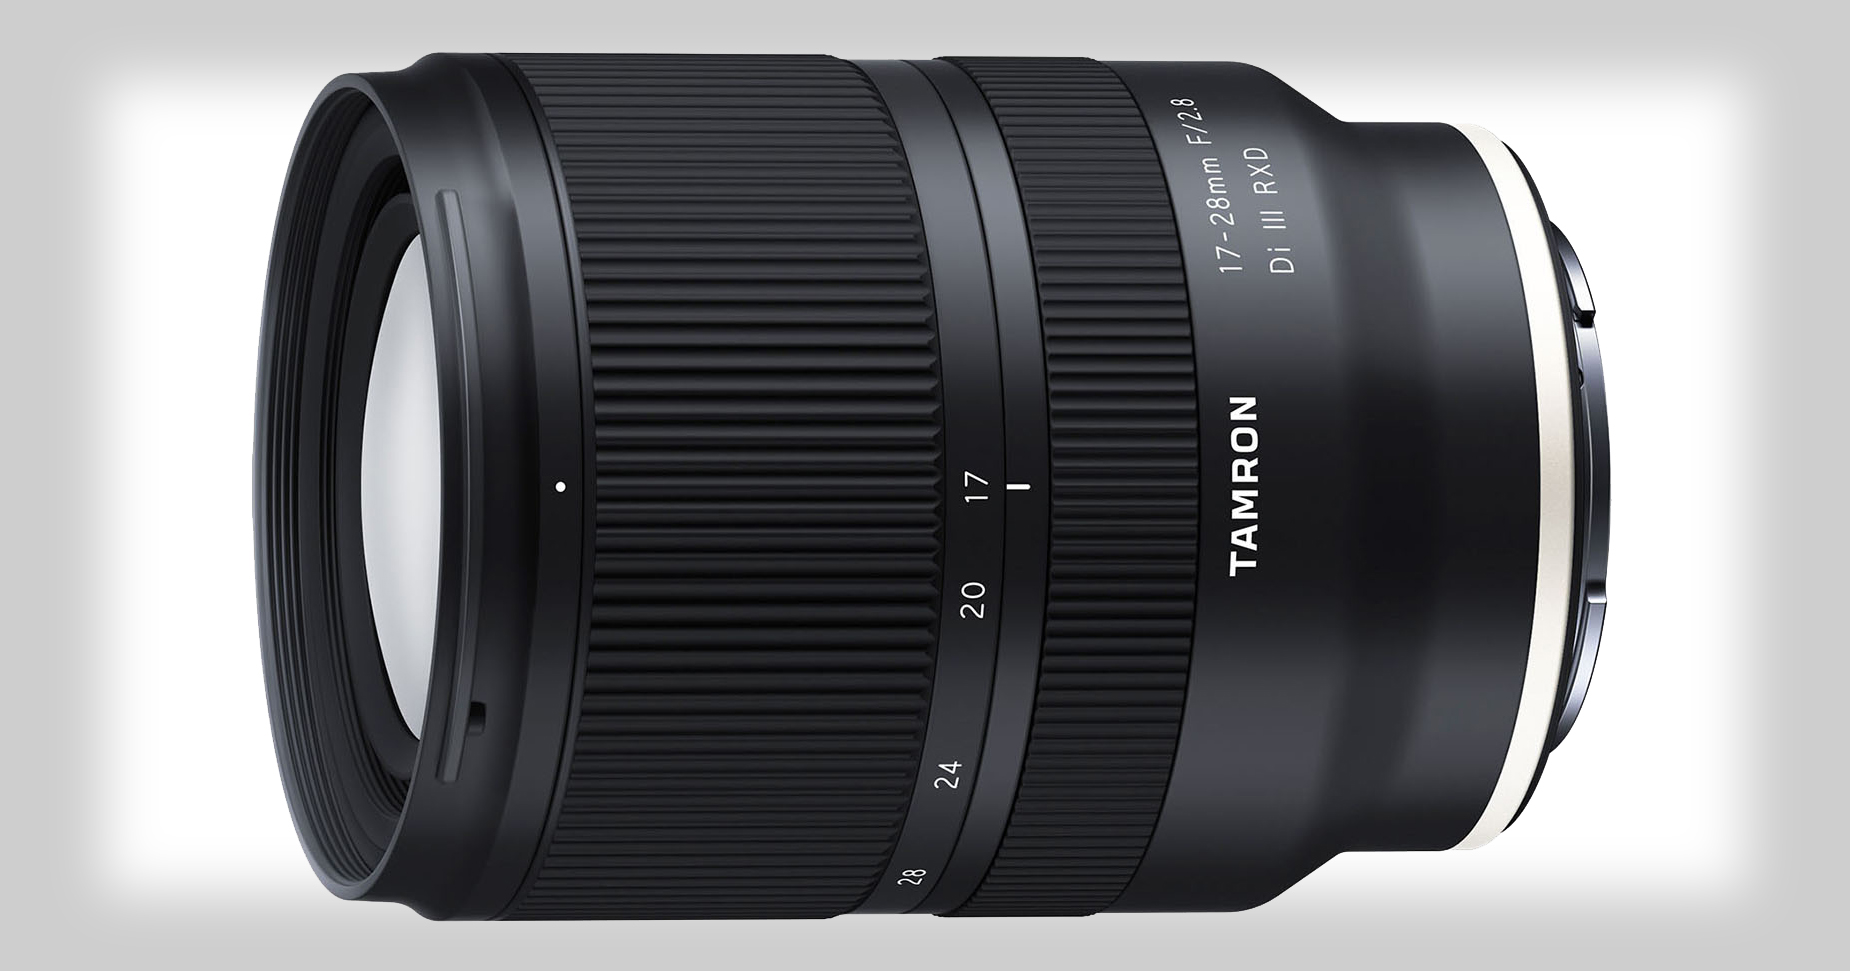  tamron apologizes 17-28mm will delayed due high demand 